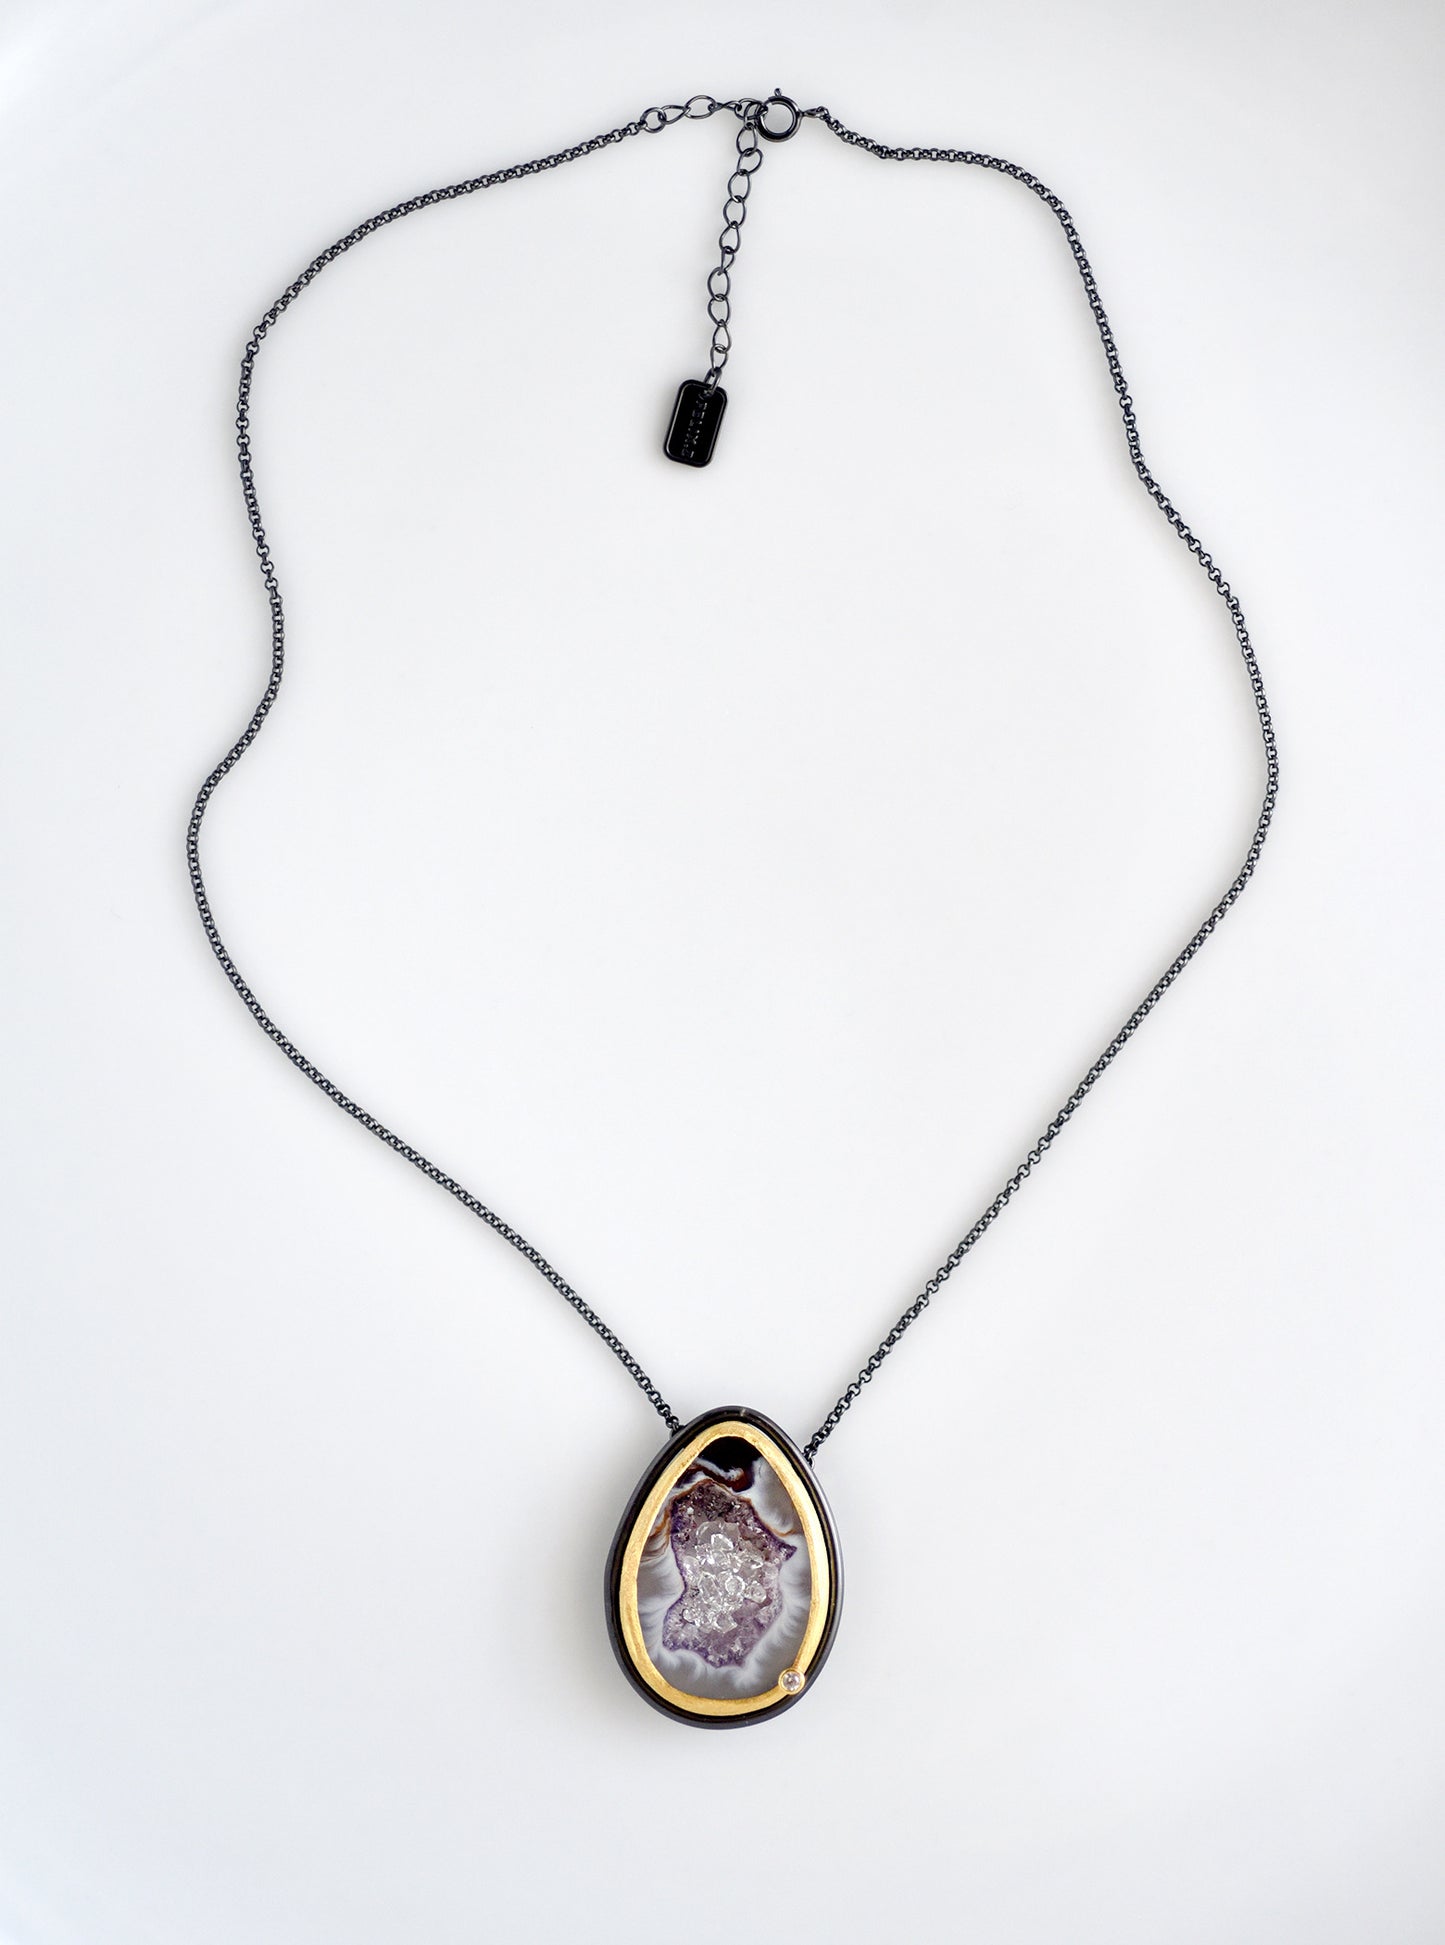 Agate Geode Necklace With Floating Herkimer Diamond